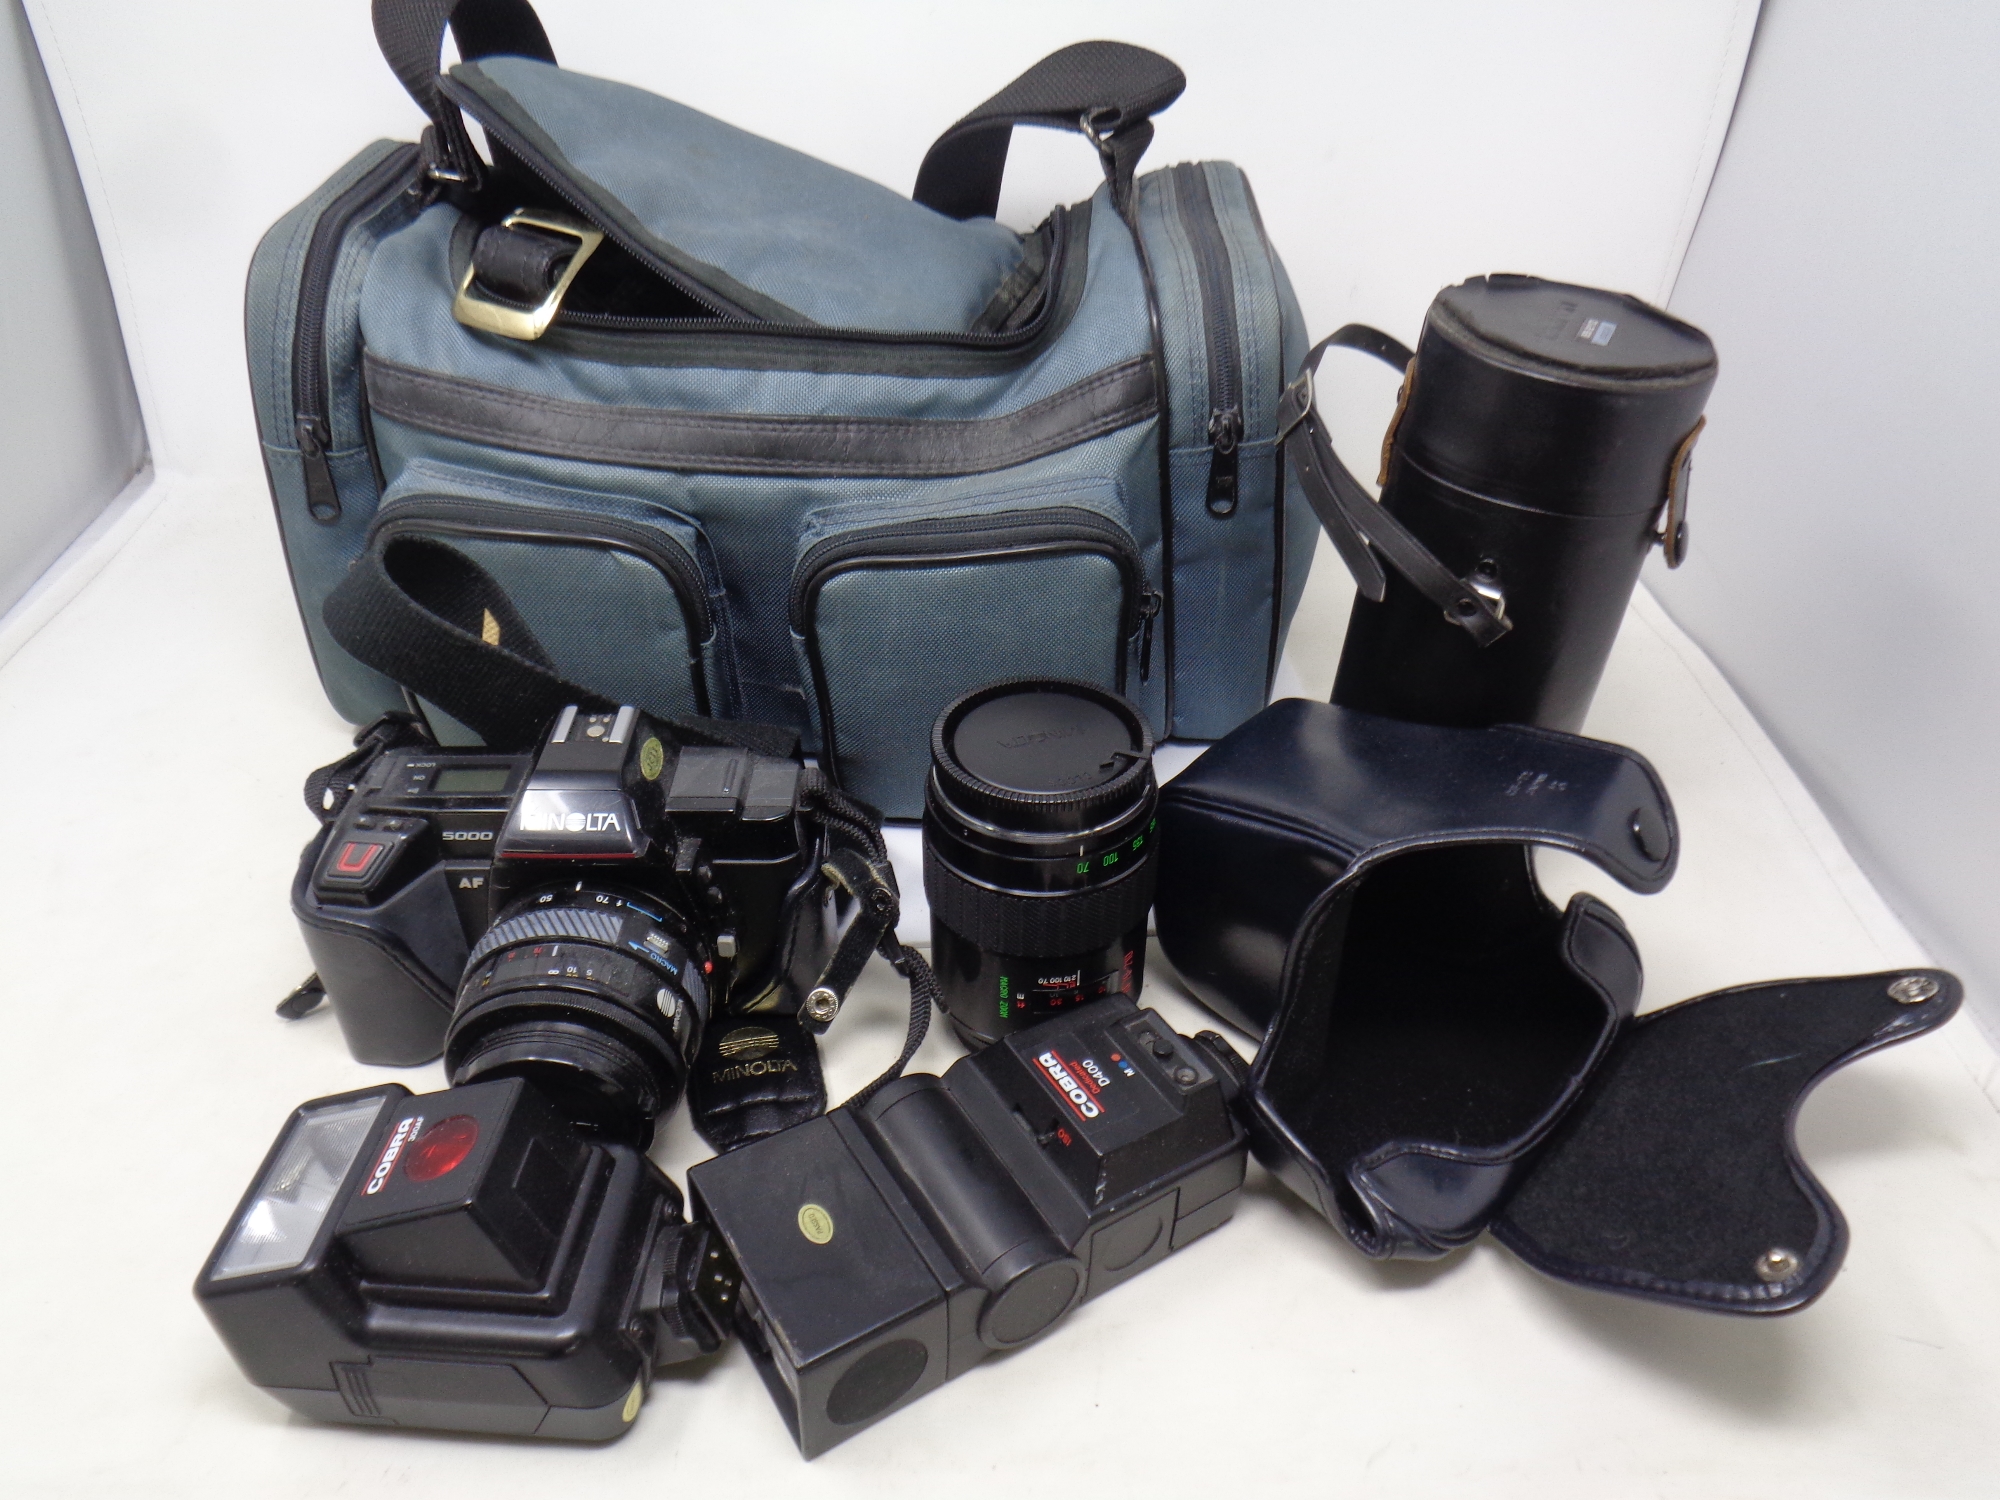 A Pentax camera bag containing a Minolta 5000 camera with lens in case together with a further case